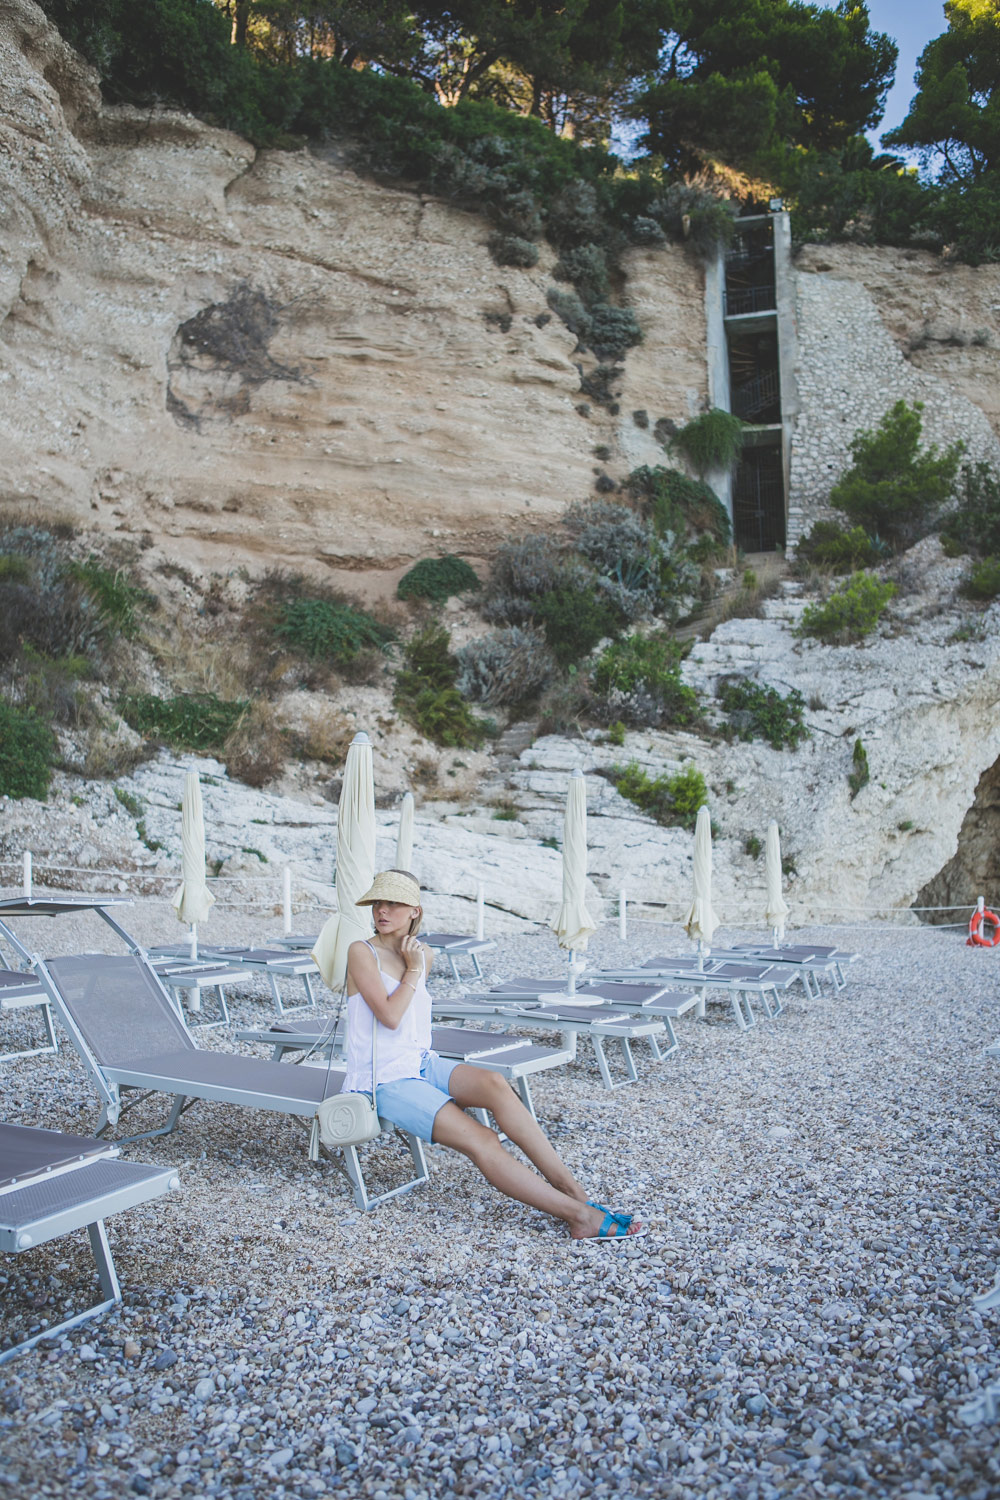 darya-kamalova-thecablook-fashion-lifestyle-blogger-from-thecablook-com-in-puglia-gargano-baia-dei-faraglioni-allegro-italia-in-asos-visor-and-blue-frontrowshop-shorts-with-gucci-disco-soho-bag-1541